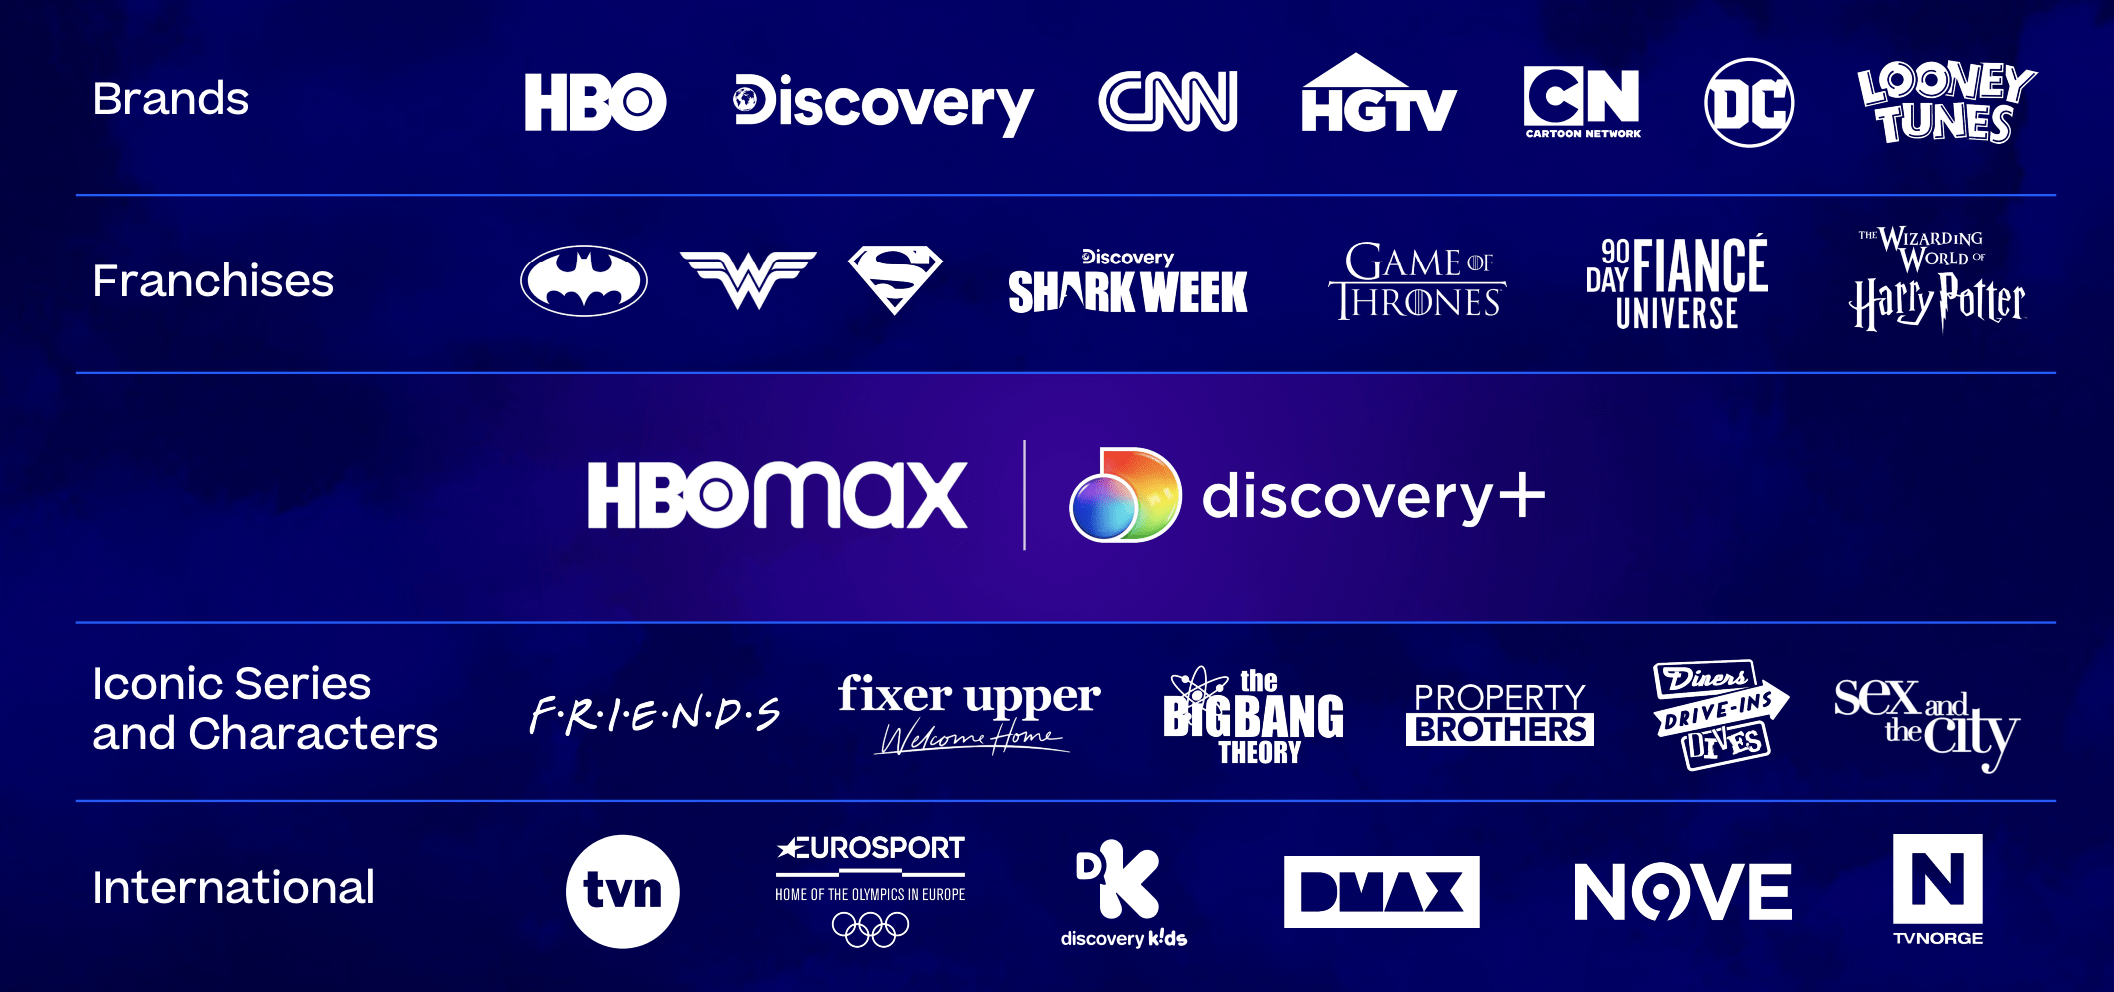 Warner Bros. Discovery - Org Chart, Teams, Culture & Jobs